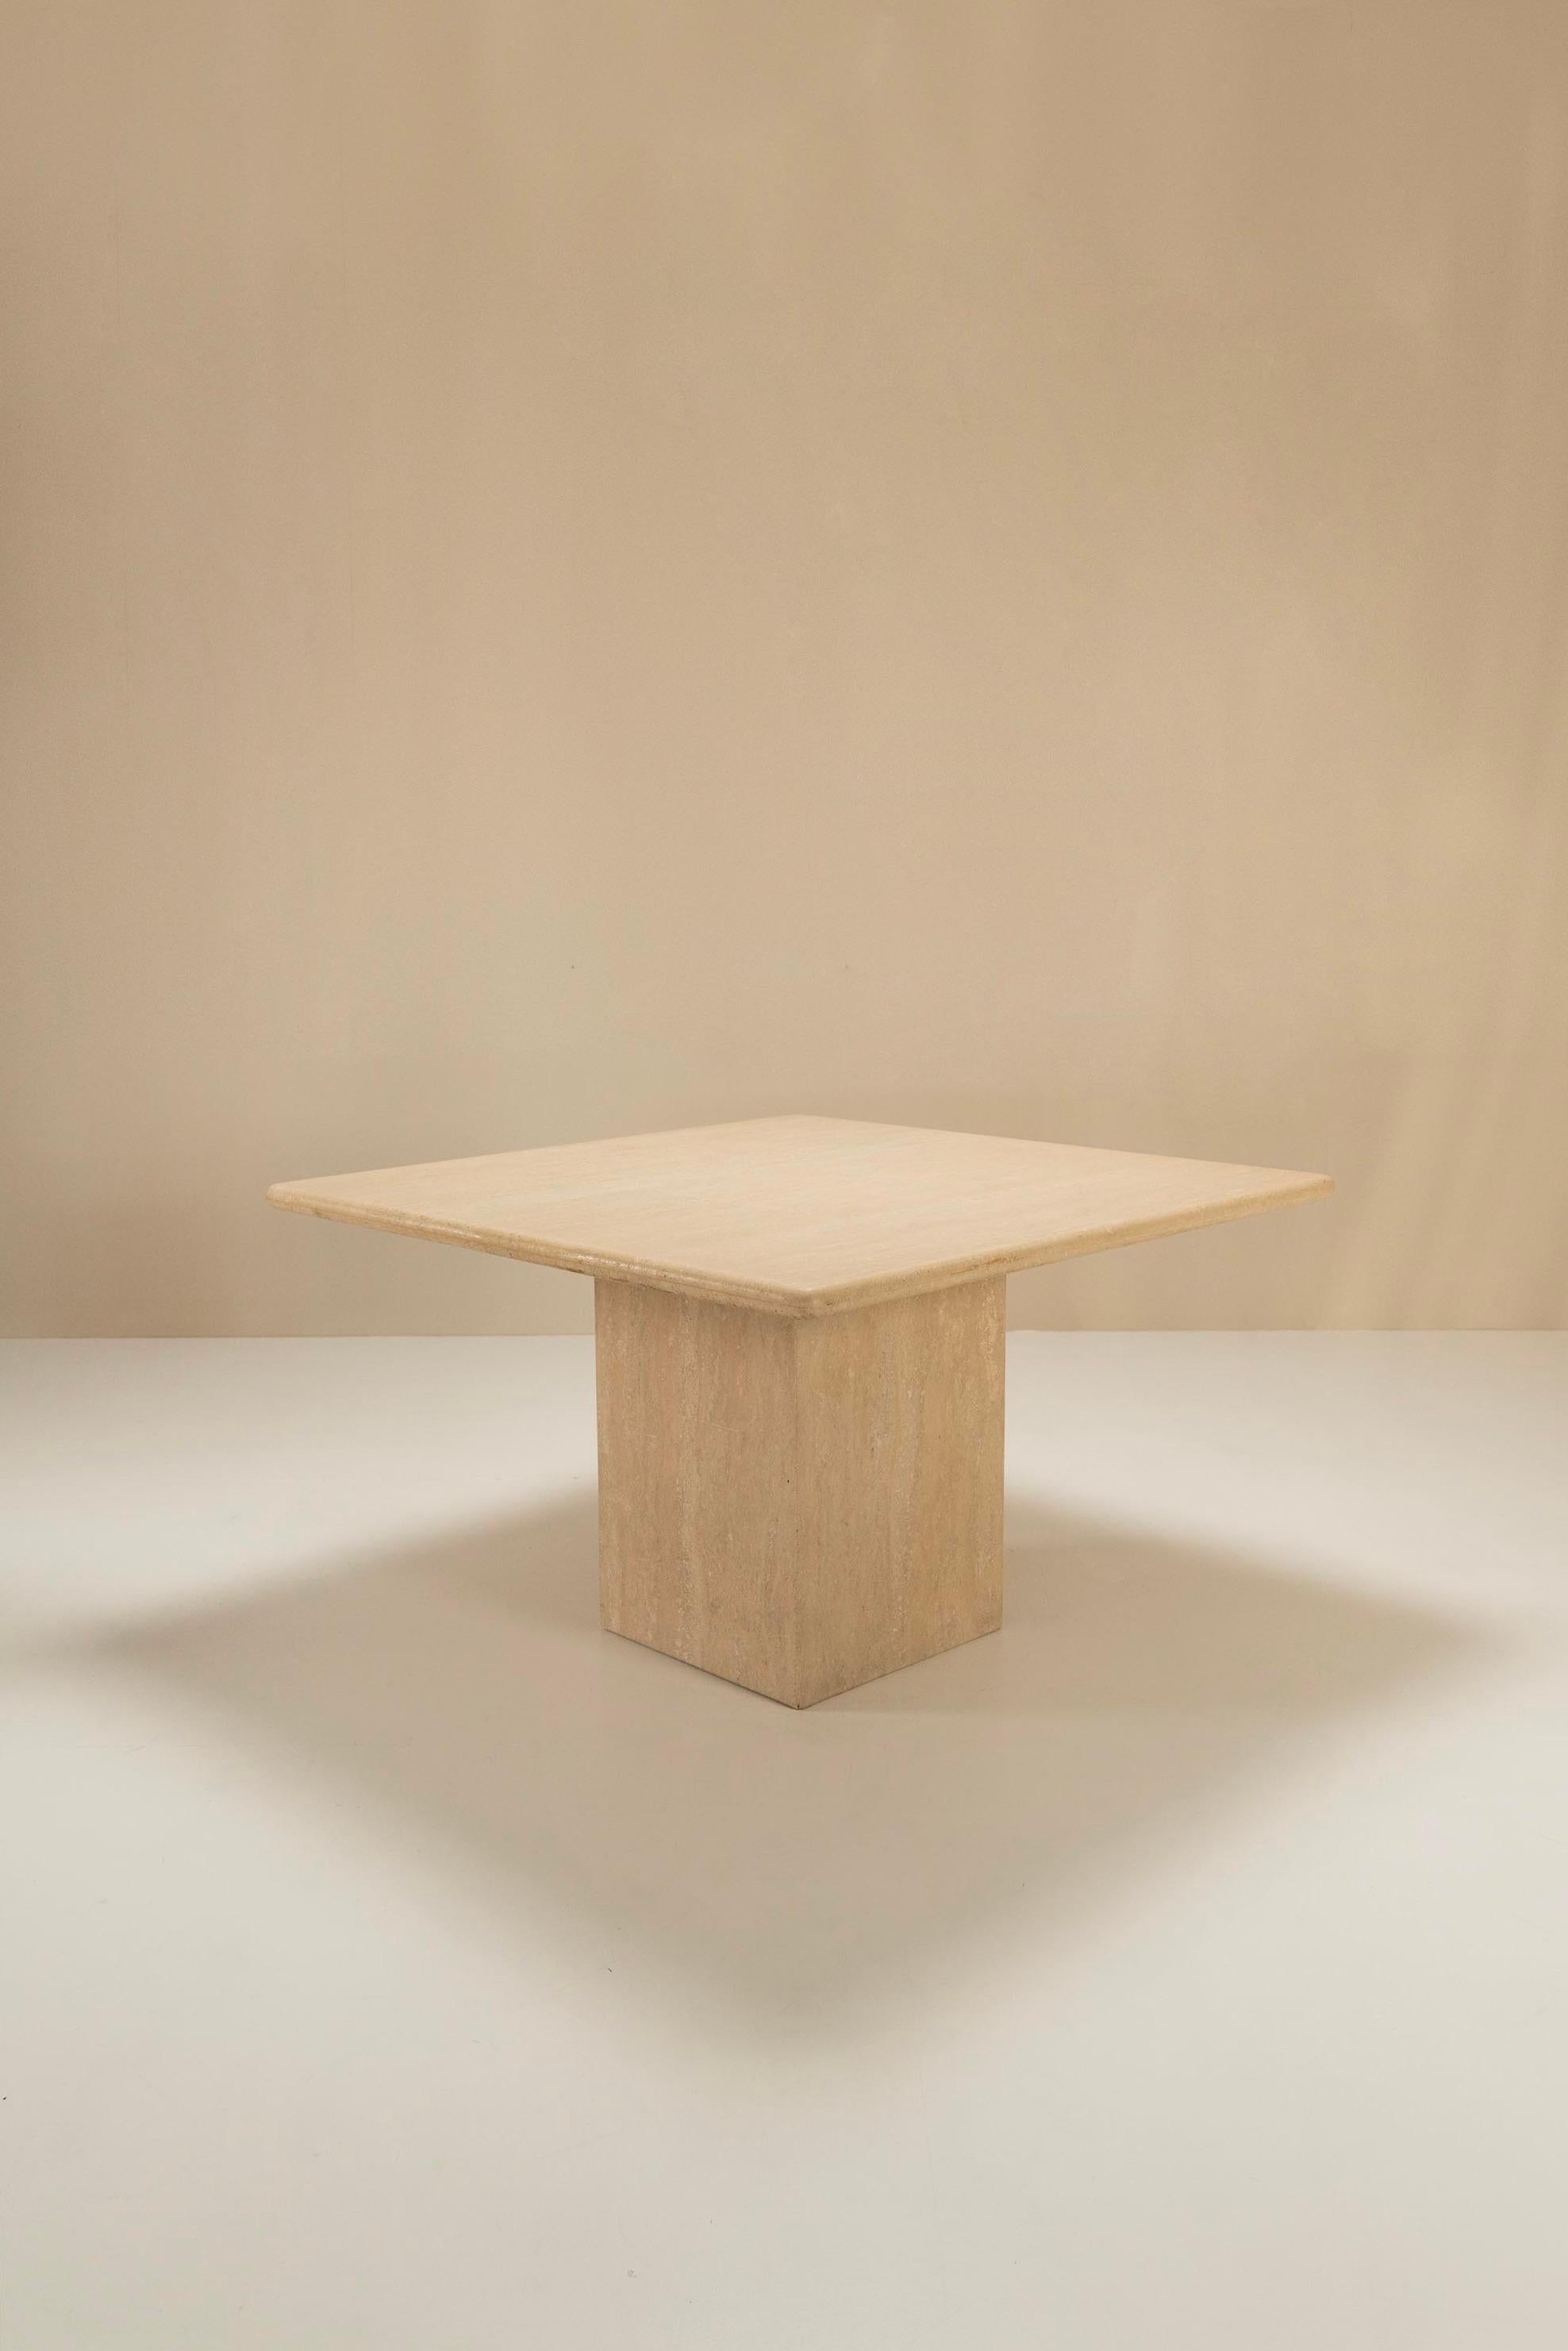 Italian Travertine Dining Table, Italy, 1970s For Sale